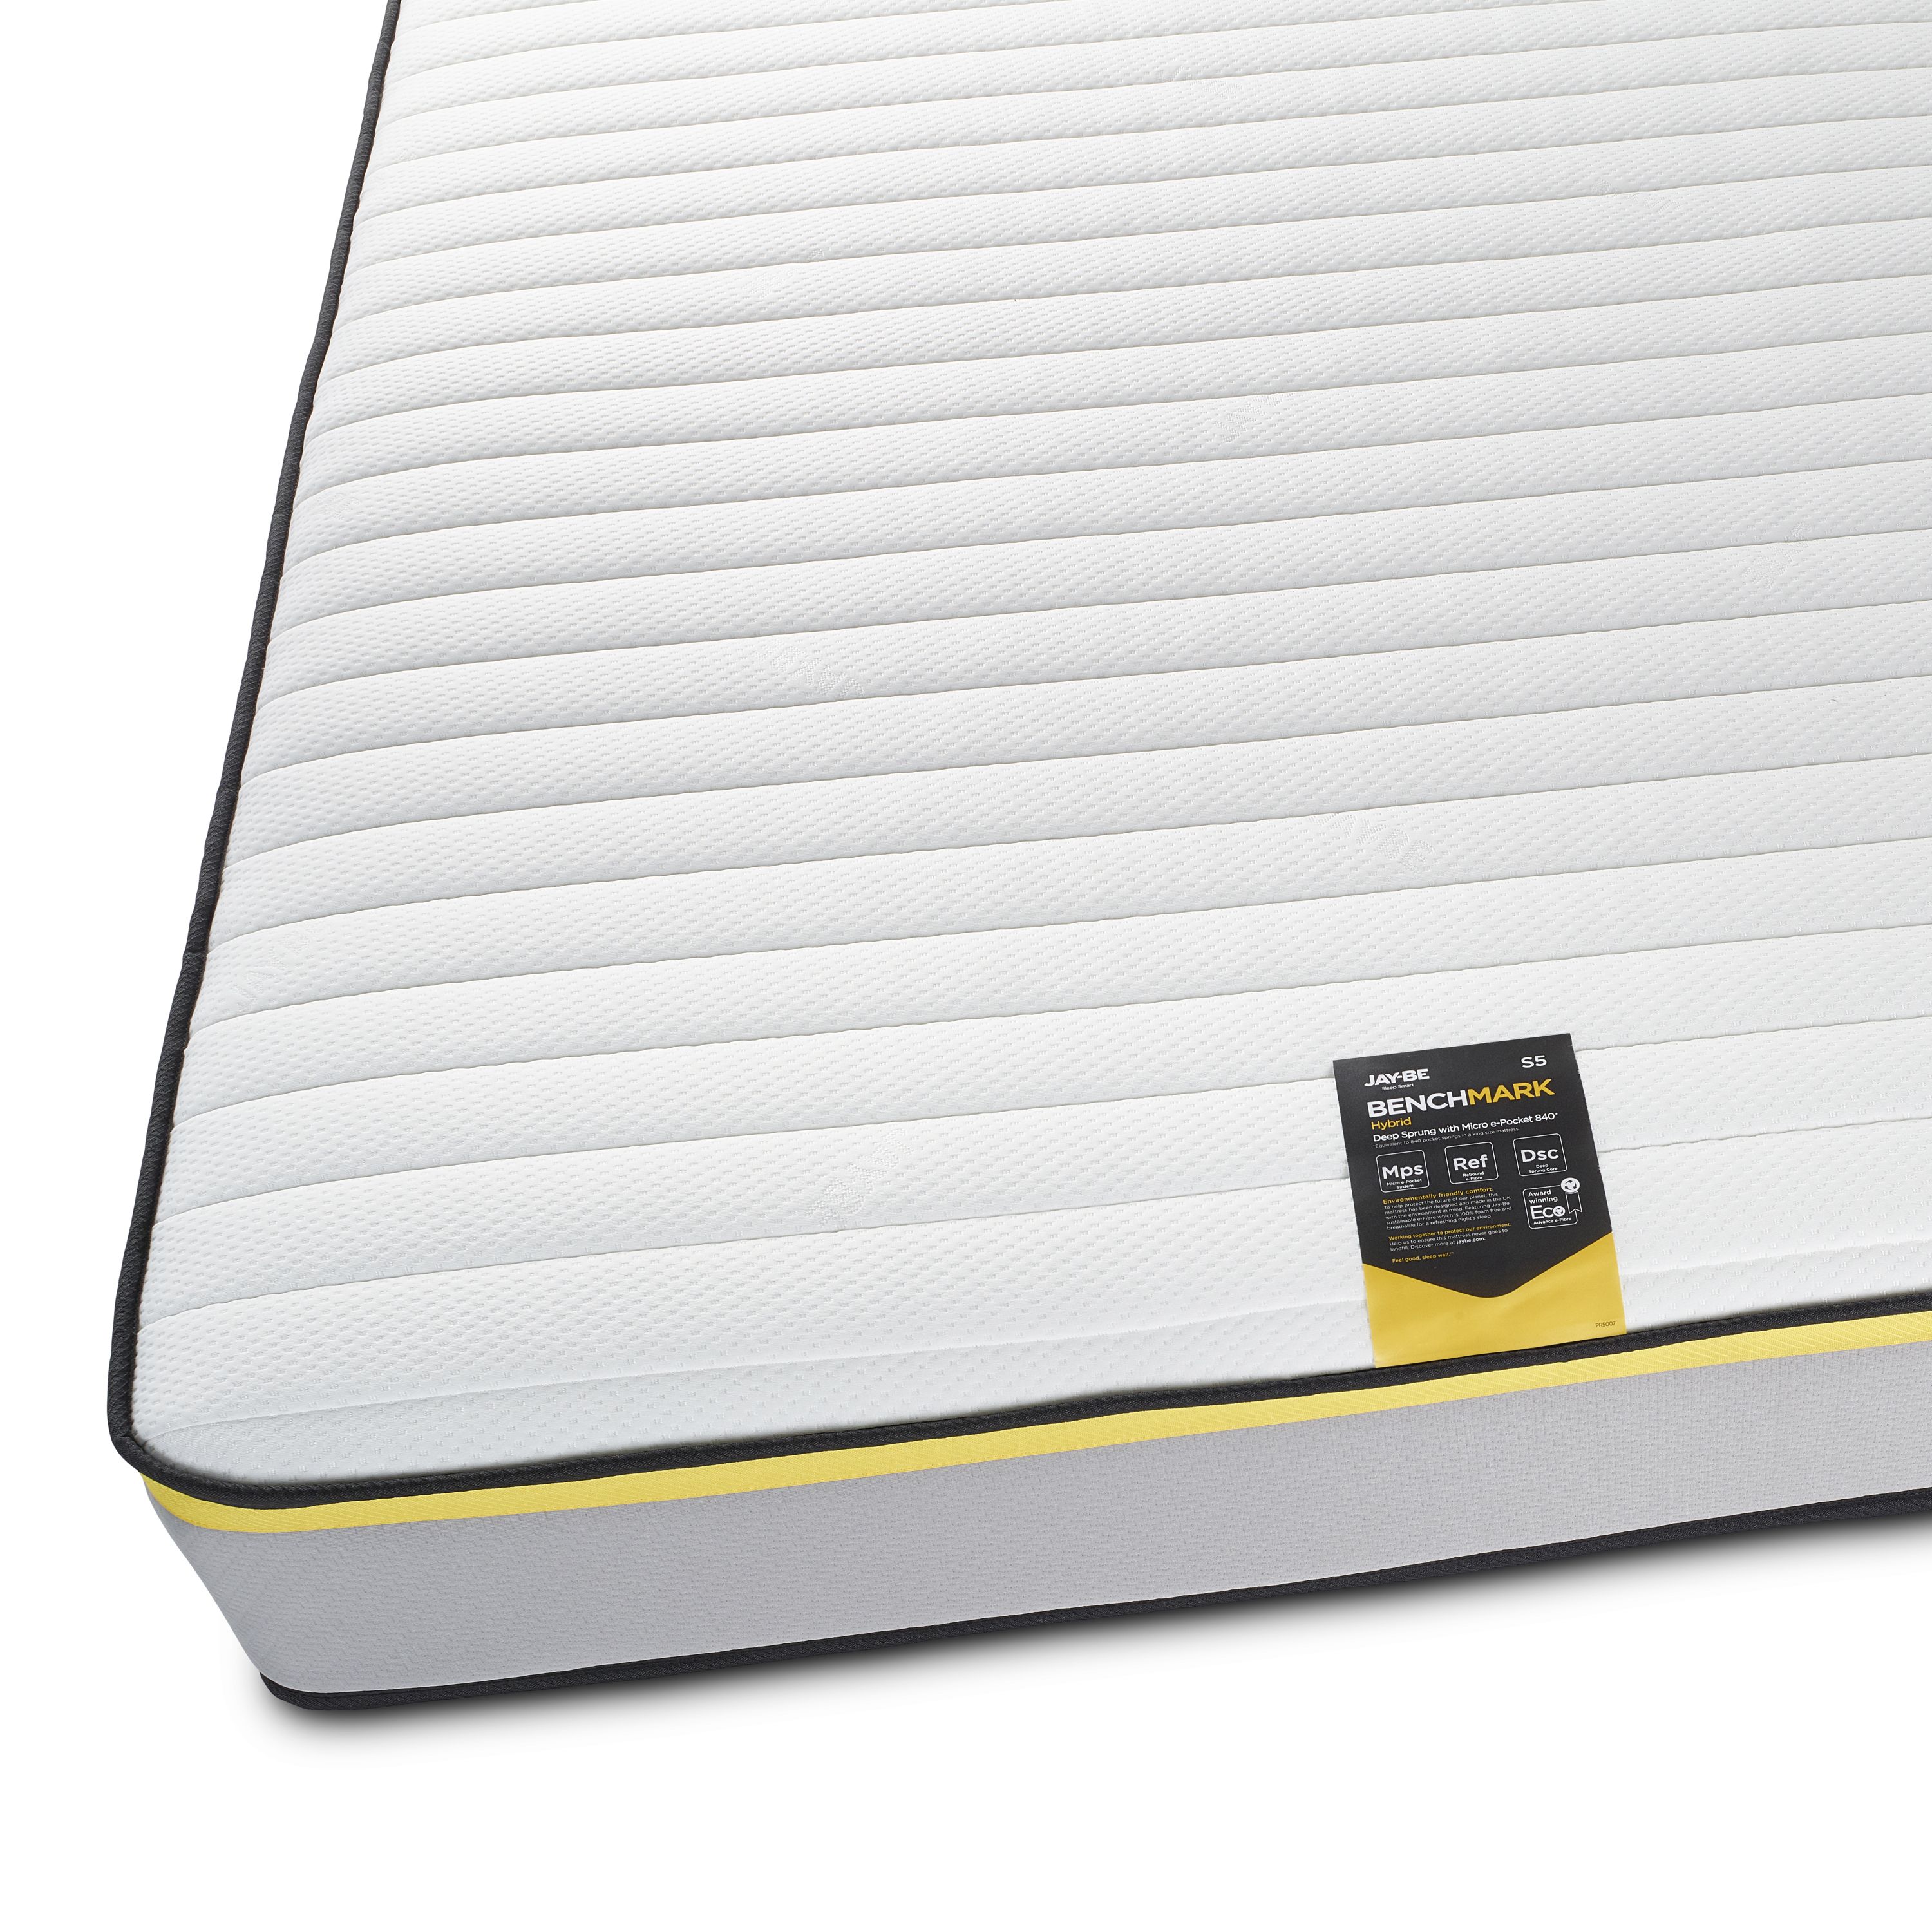 Jay-Be Benchmark S5 Hybrid Eco Friendly Open coil Water resistant King Mattress